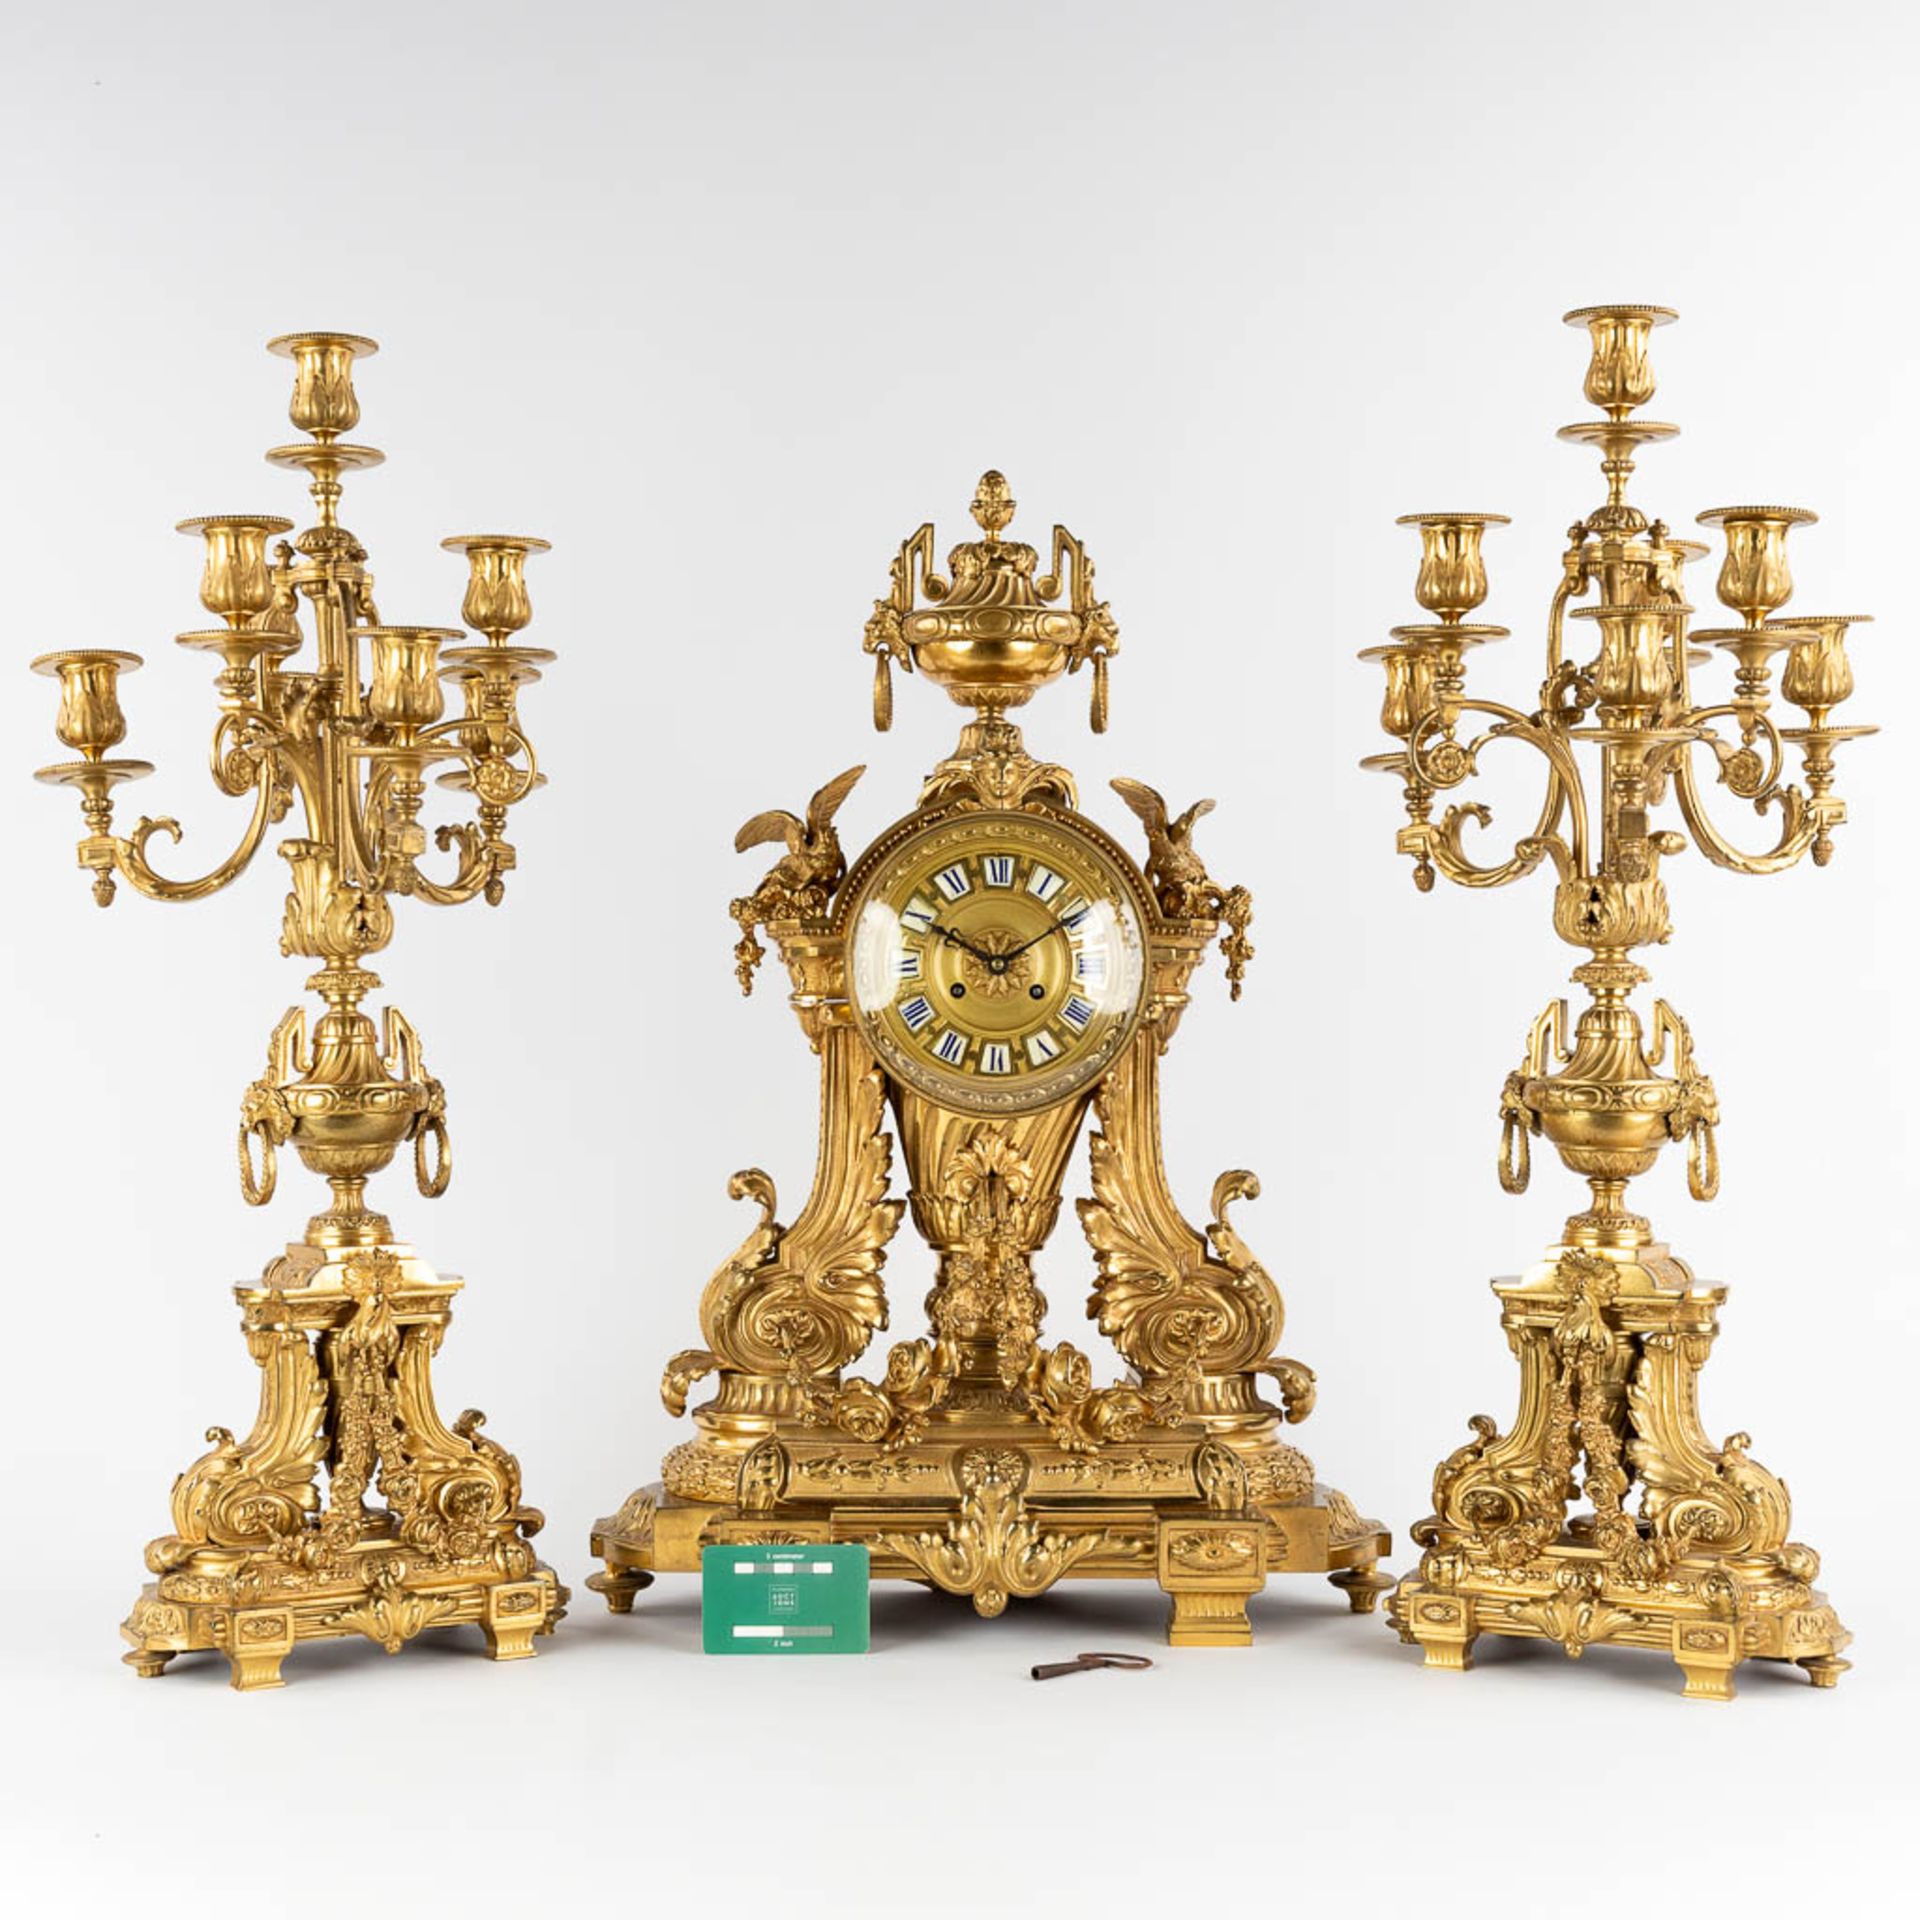 A three-piece mantle garniture clock and candelabra, gilt bronze in a Louis XVI style, 19th C. (D:19 - Image 2 of 19